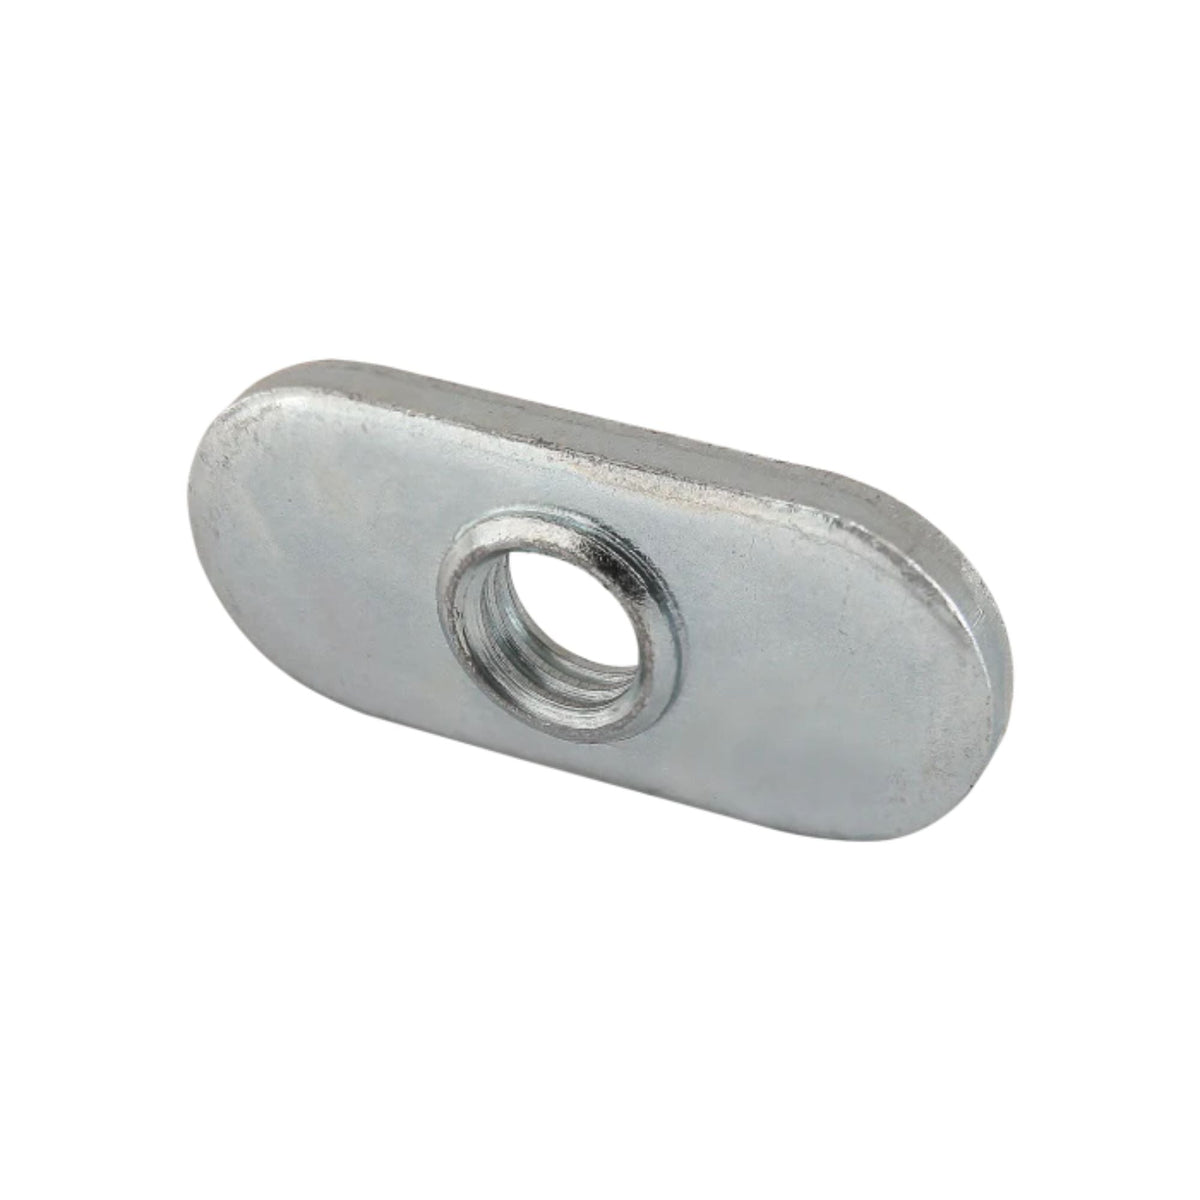 side view of a metal, rectangular t-nut with rounded ends and a hole in the center